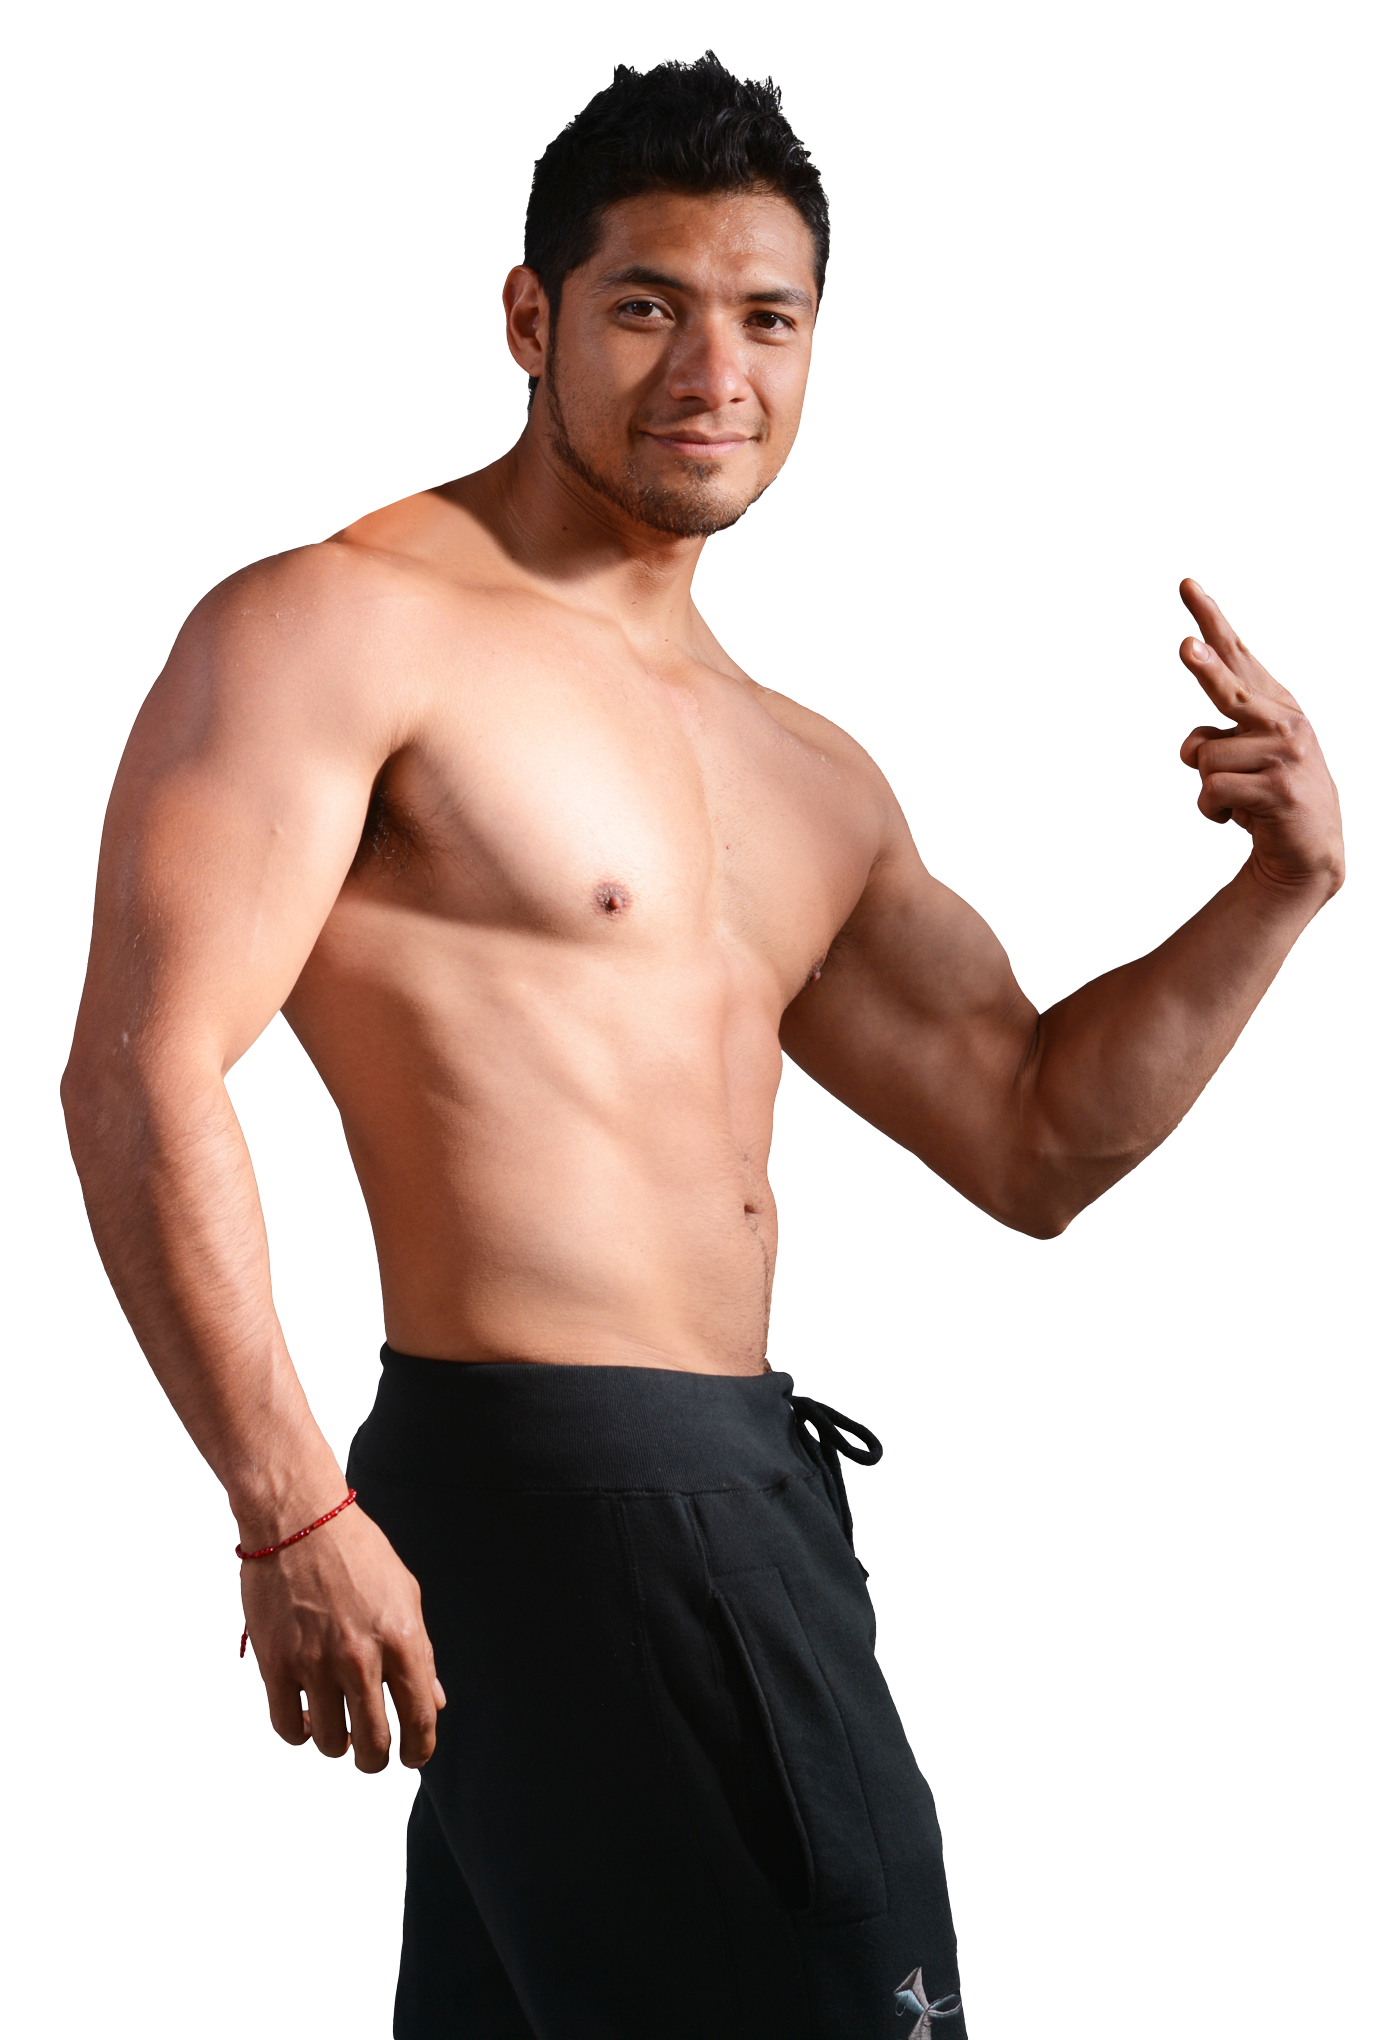 Png images pngpix man. Dumbbell clipart male fitness